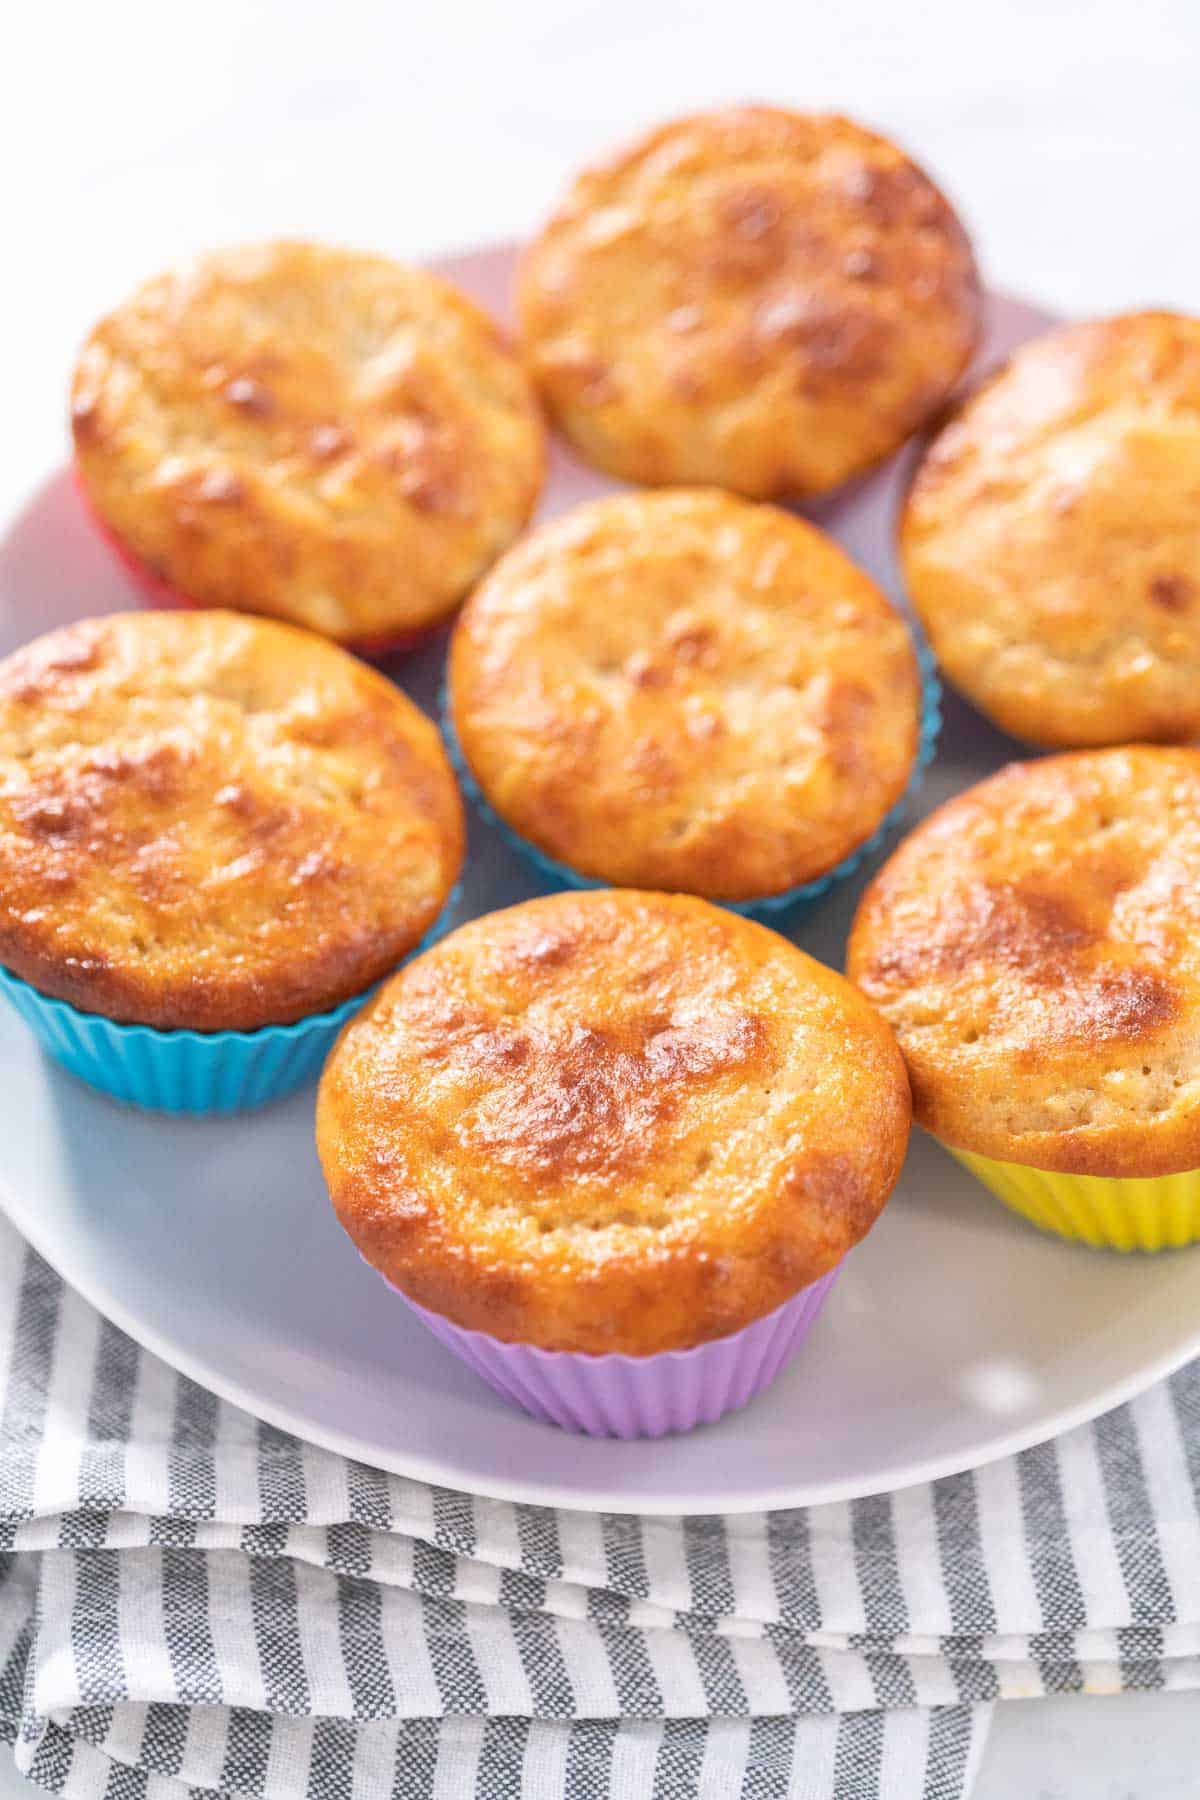 A plate of muffins resting on a lined kitchen towel.